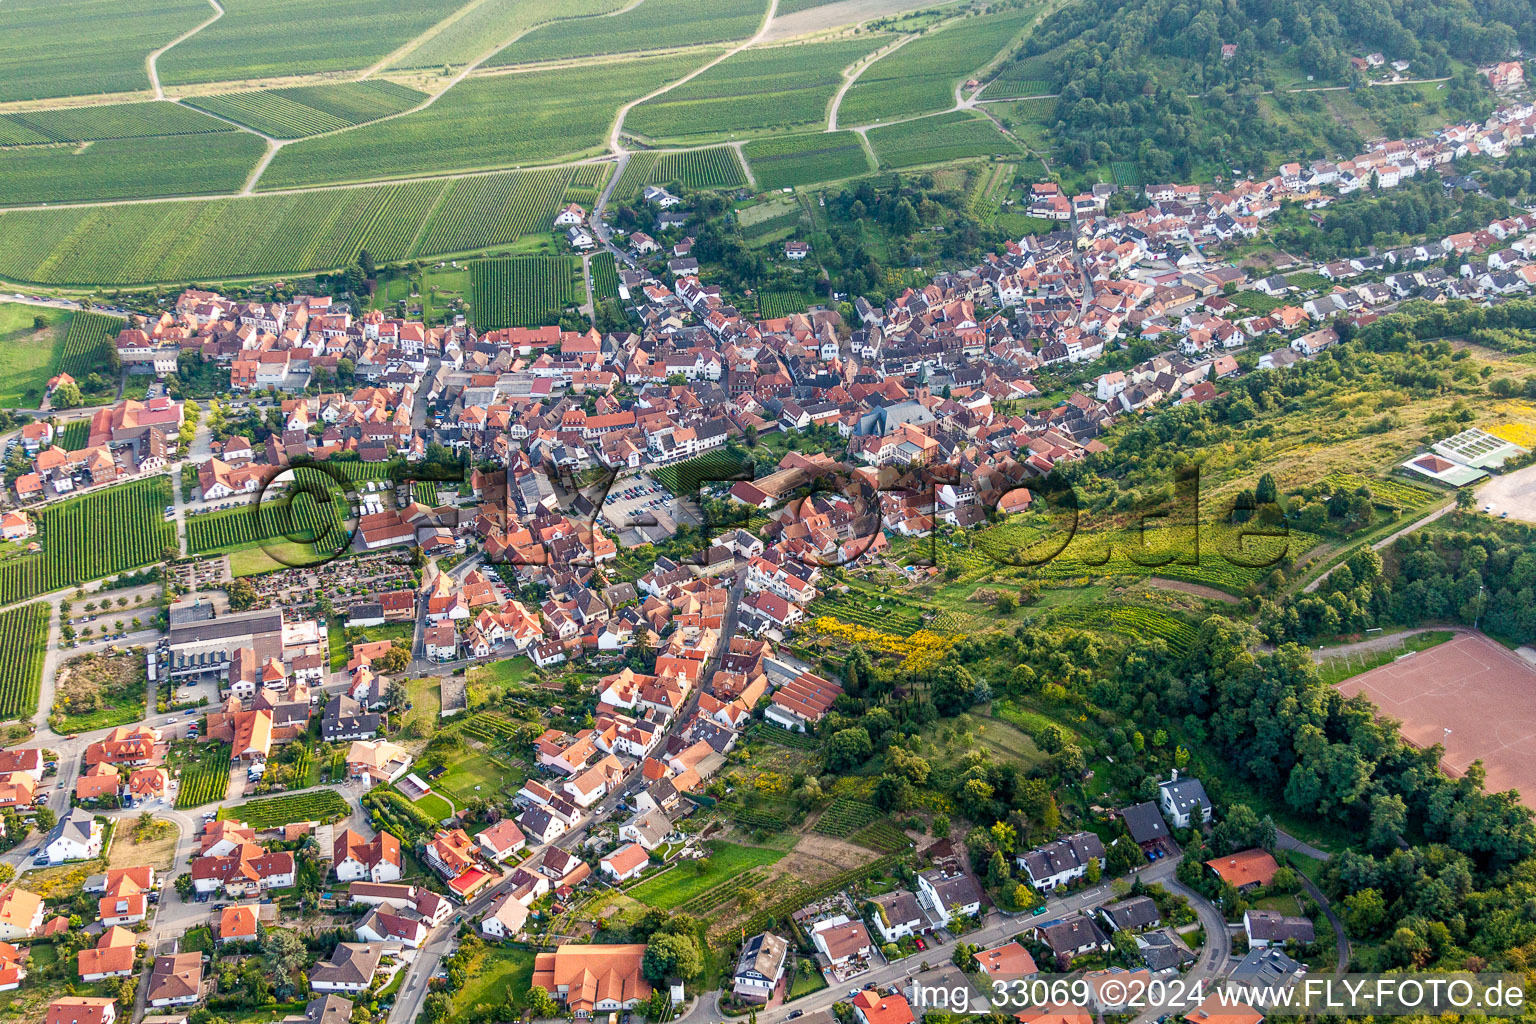 Oblique view of Village - view on the edge of agricultural fields and farmland in Sankt Martin in the state Rhineland-Palatinate, Germany